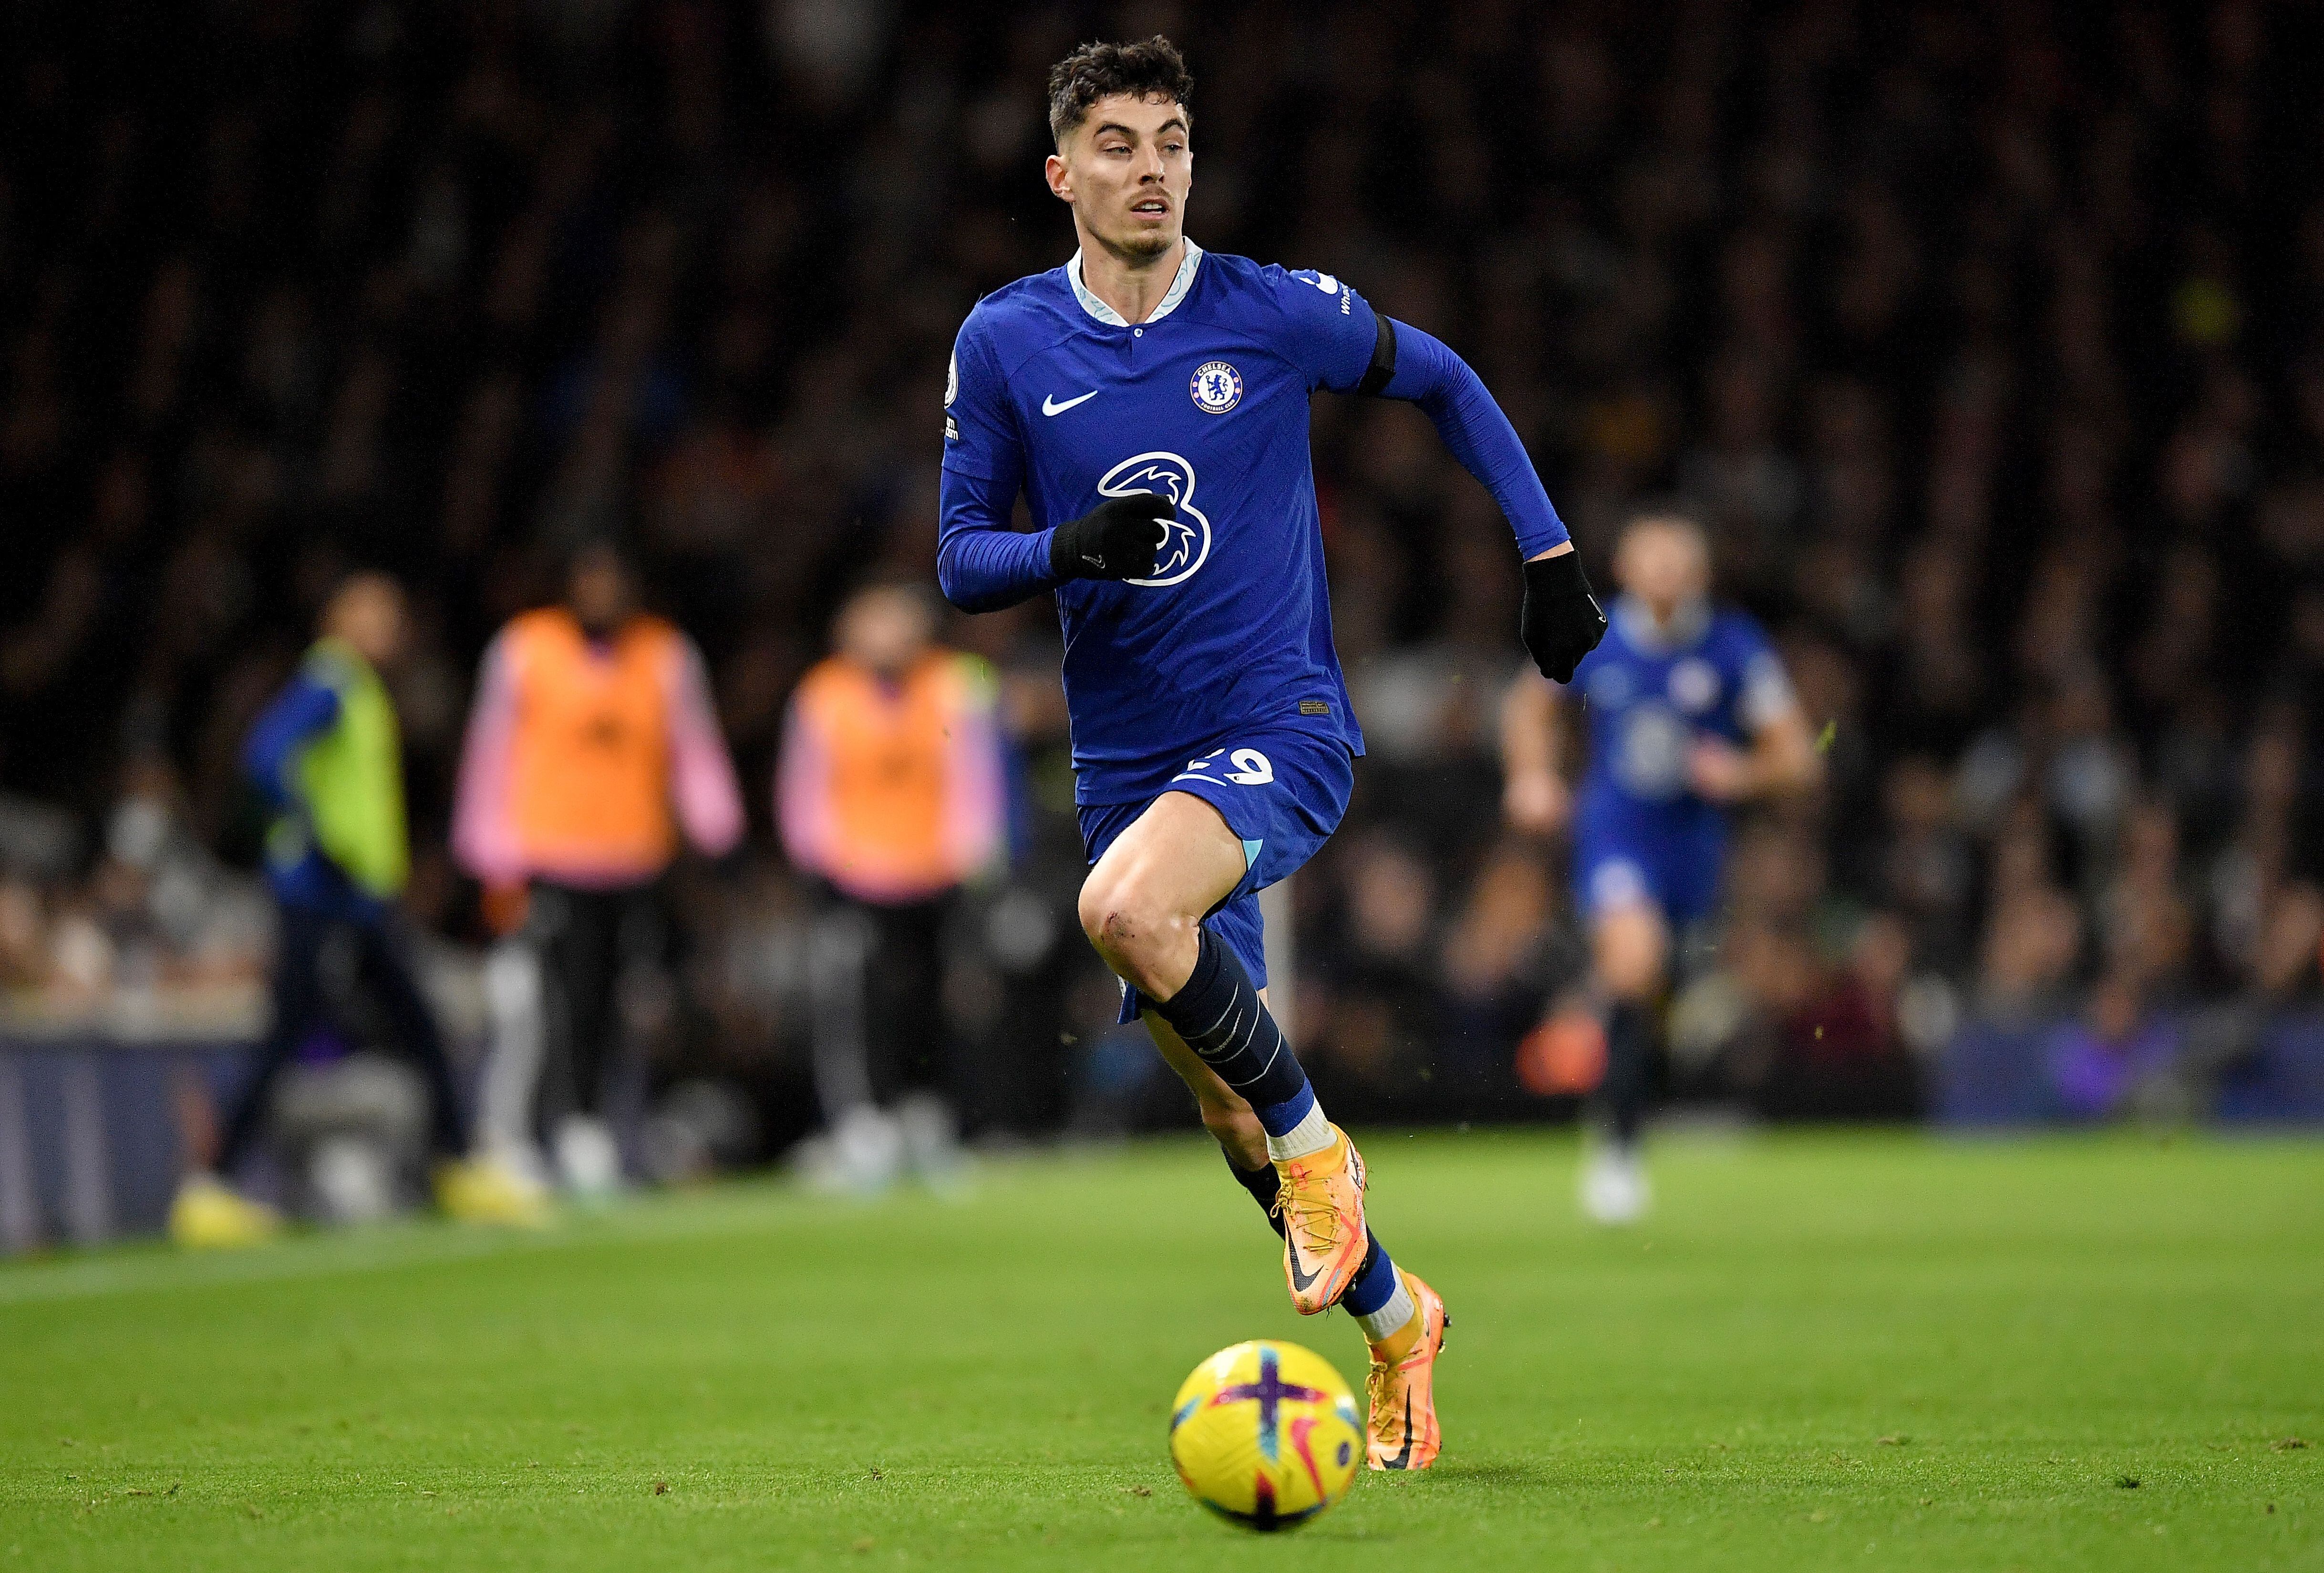 London (United Kingdom), 12/01/2023.- Kai Havertz of Chelsea in action during the English Premier League soccer match between Fulham FC and Chelsea FC in London, Britain, 12 January 2023. (Reino Unido, Londres) EFE/EPA/Vince Mignott EDITORIAL USE ONLY. No use with unauthorized audio, video, data, fixture lists, club/league logos or 'live' services. Online in-match use limited to 120 images, no video emulation. No use in betting, games or single club/league/player publications